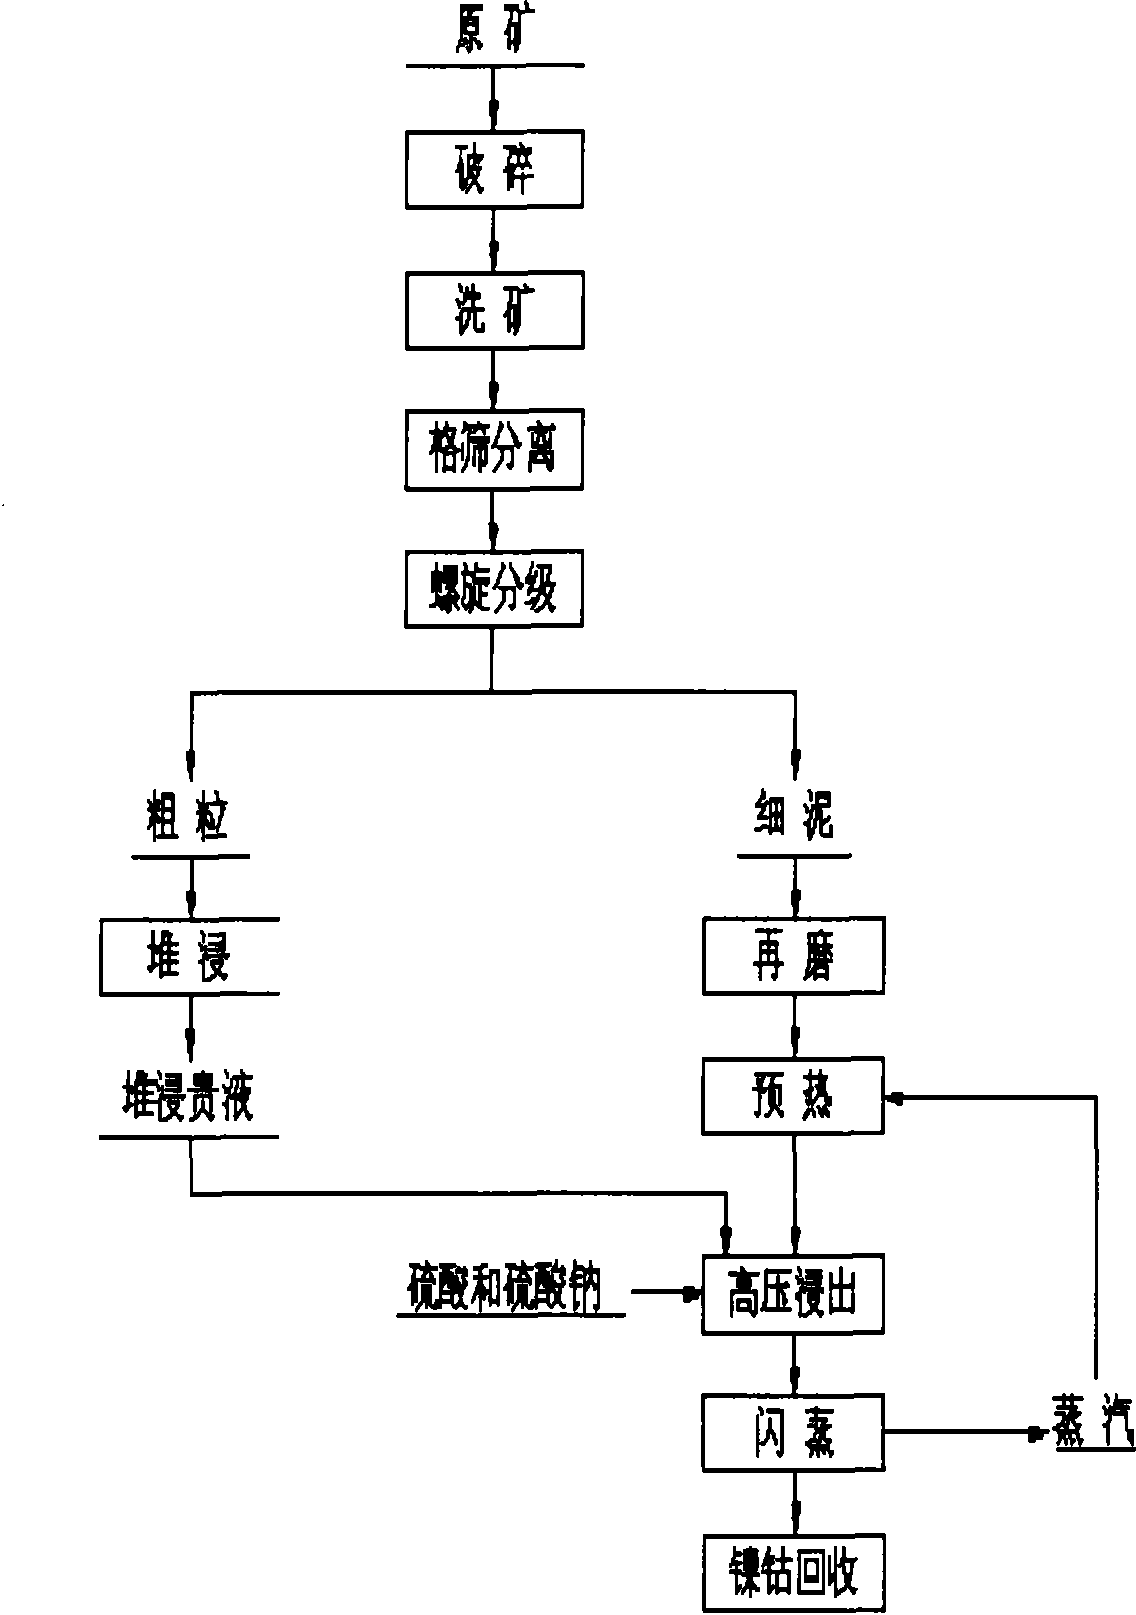 Method for reducing acid consumption during heap leaching and high-pressure leaching of nickel laterite ore